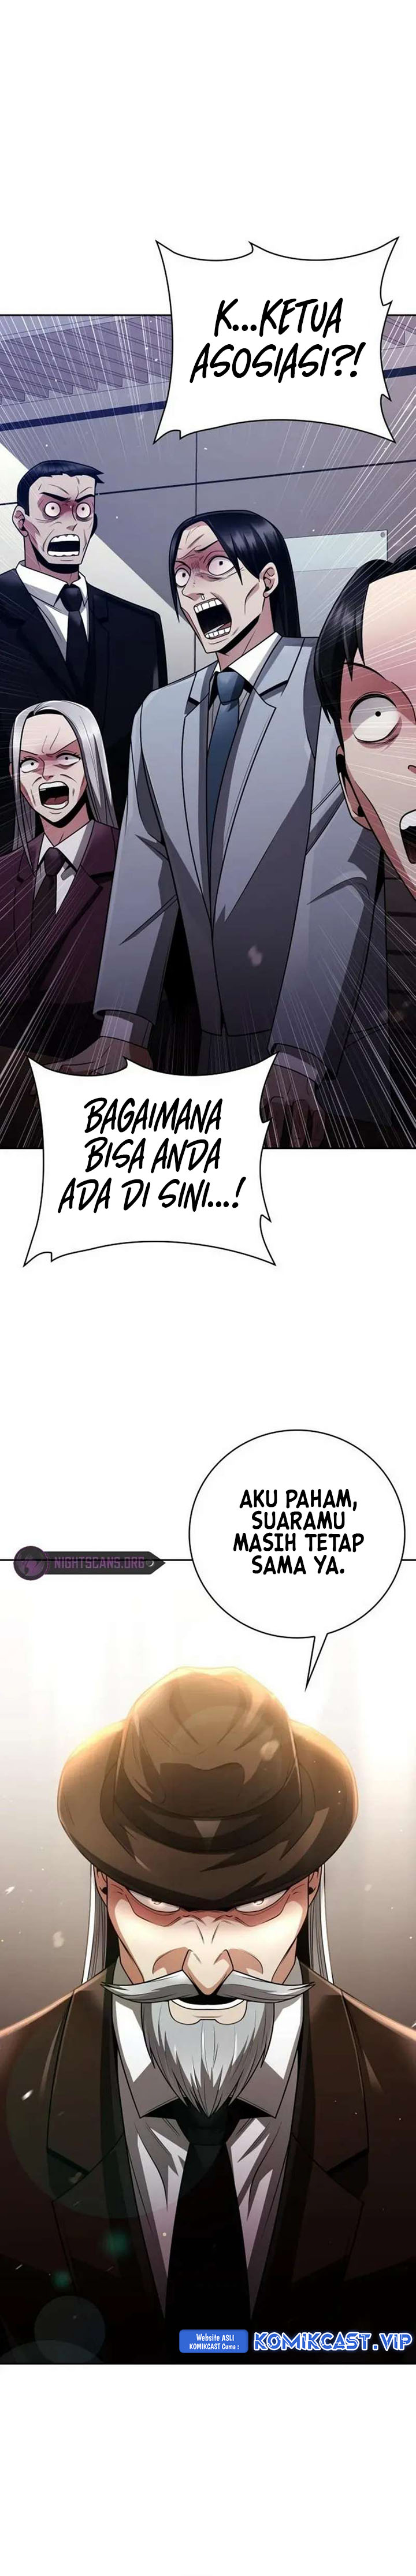 Dilarang COPAS - situs resmi www.mangacanblog.com - Komik clever cleaning life of the returned genius hunter 042 - chapter 42 43 Indonesia clever cleaning life of the returned genius hunter 042 - chapter 42 Terbaru 4|Baca Manga Komik Indonesia|Mangacan